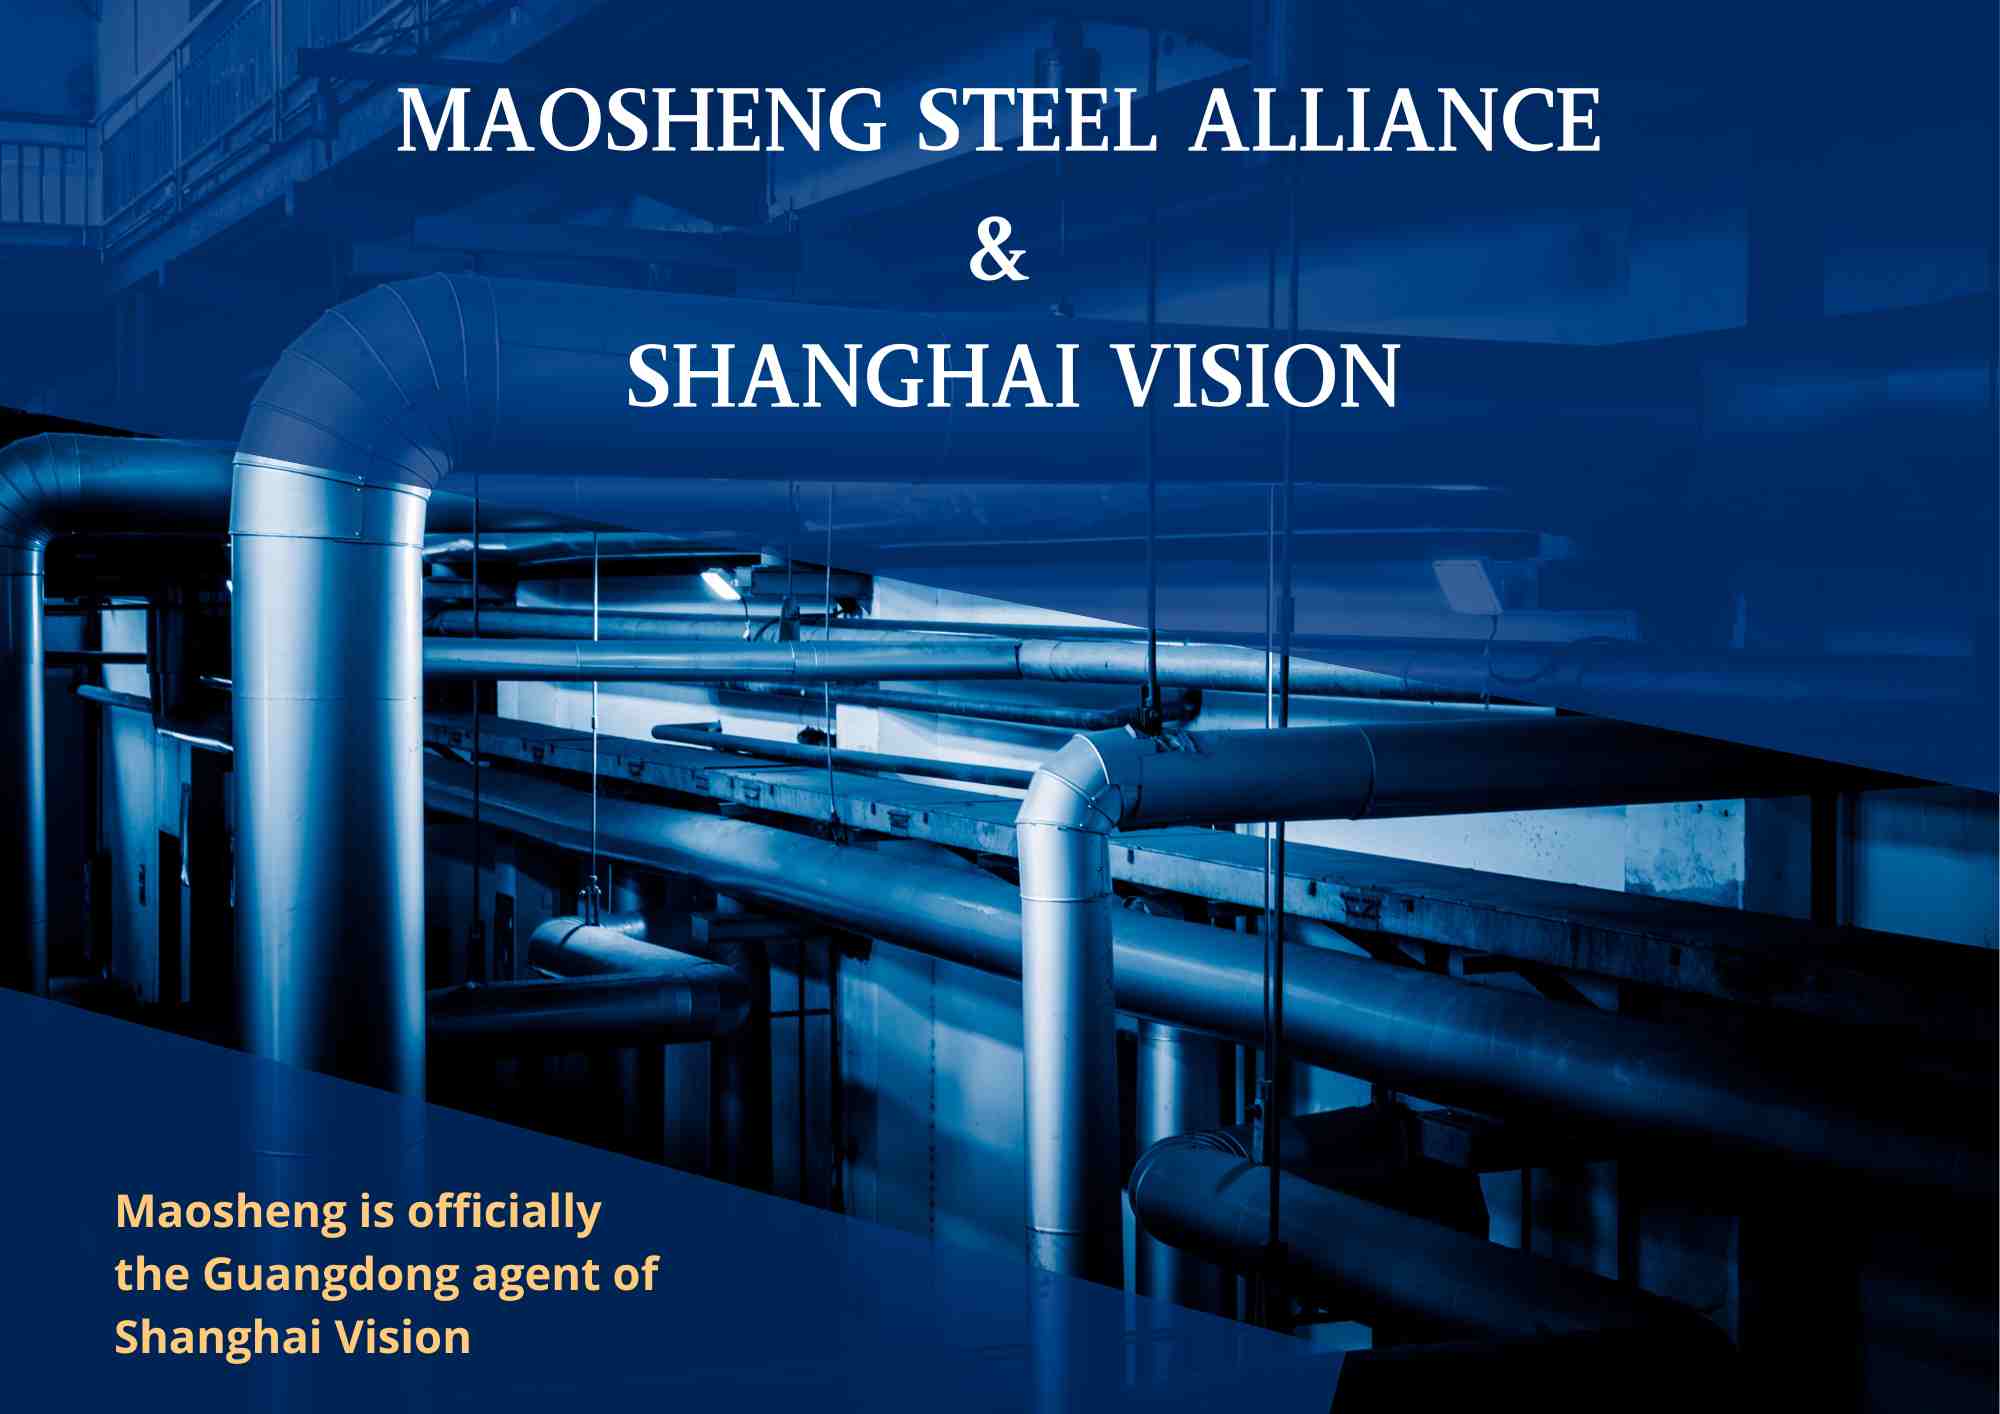 [Maosheng Steel Alliance & Shanghai Vision] Working Together to Build Dreams and Win the Future